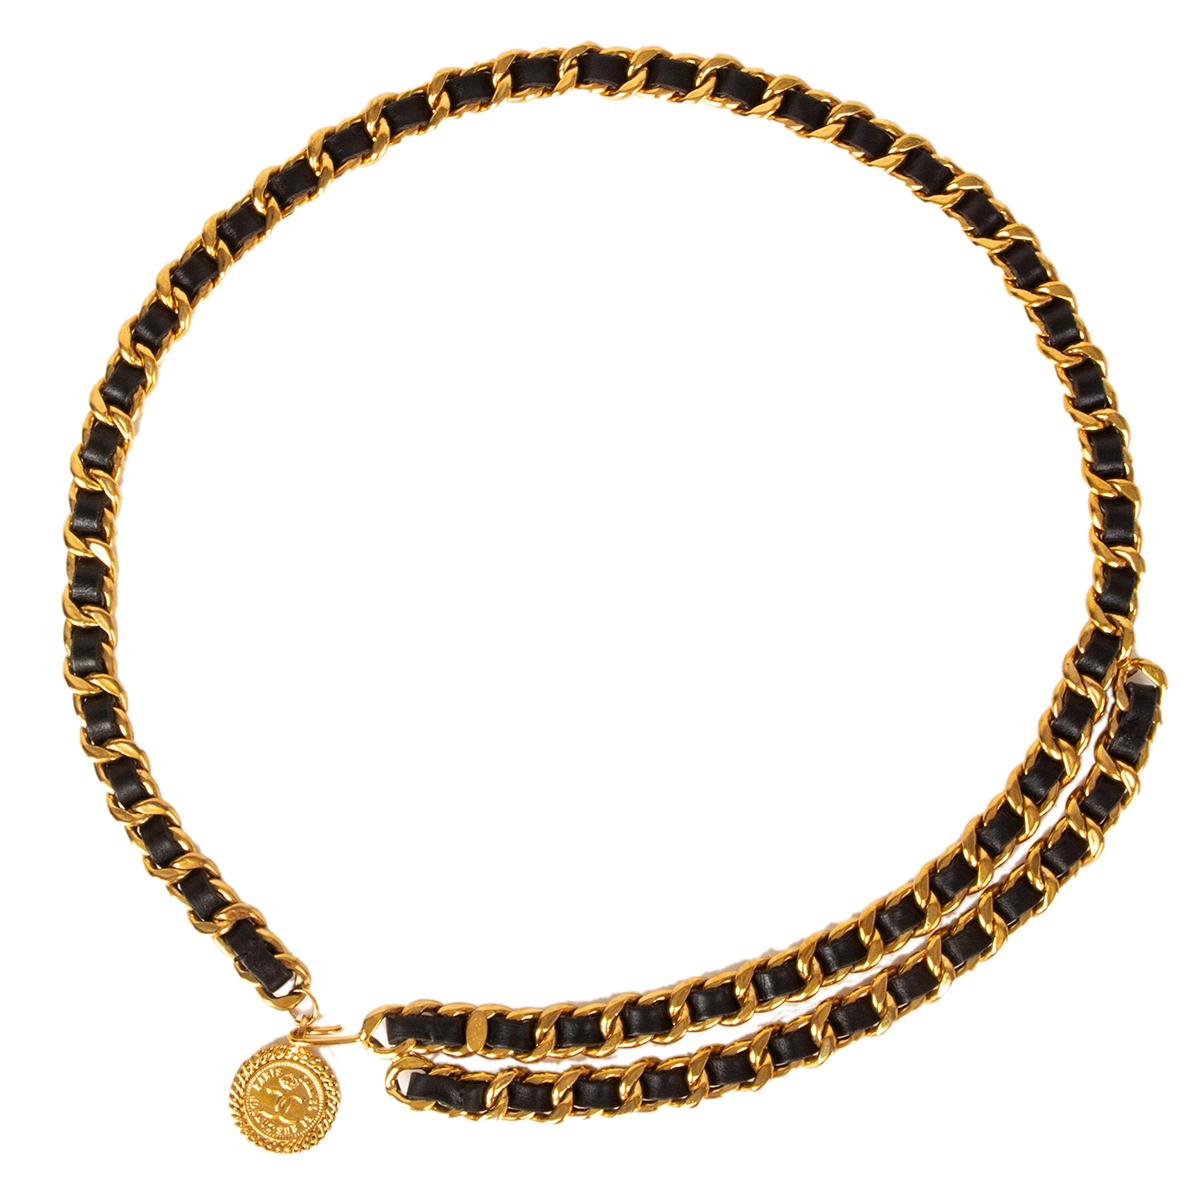 Chanel chain belt in gold-tone metal and black leather featuring CC coin charm. belt is adjustable and fits all sizes. Has been worn and is in excellent condition. Comes with dust bag. 

Width 1.5cm (0.6in)
Length 94cm (36.7in)
Hardware Gold-Tone